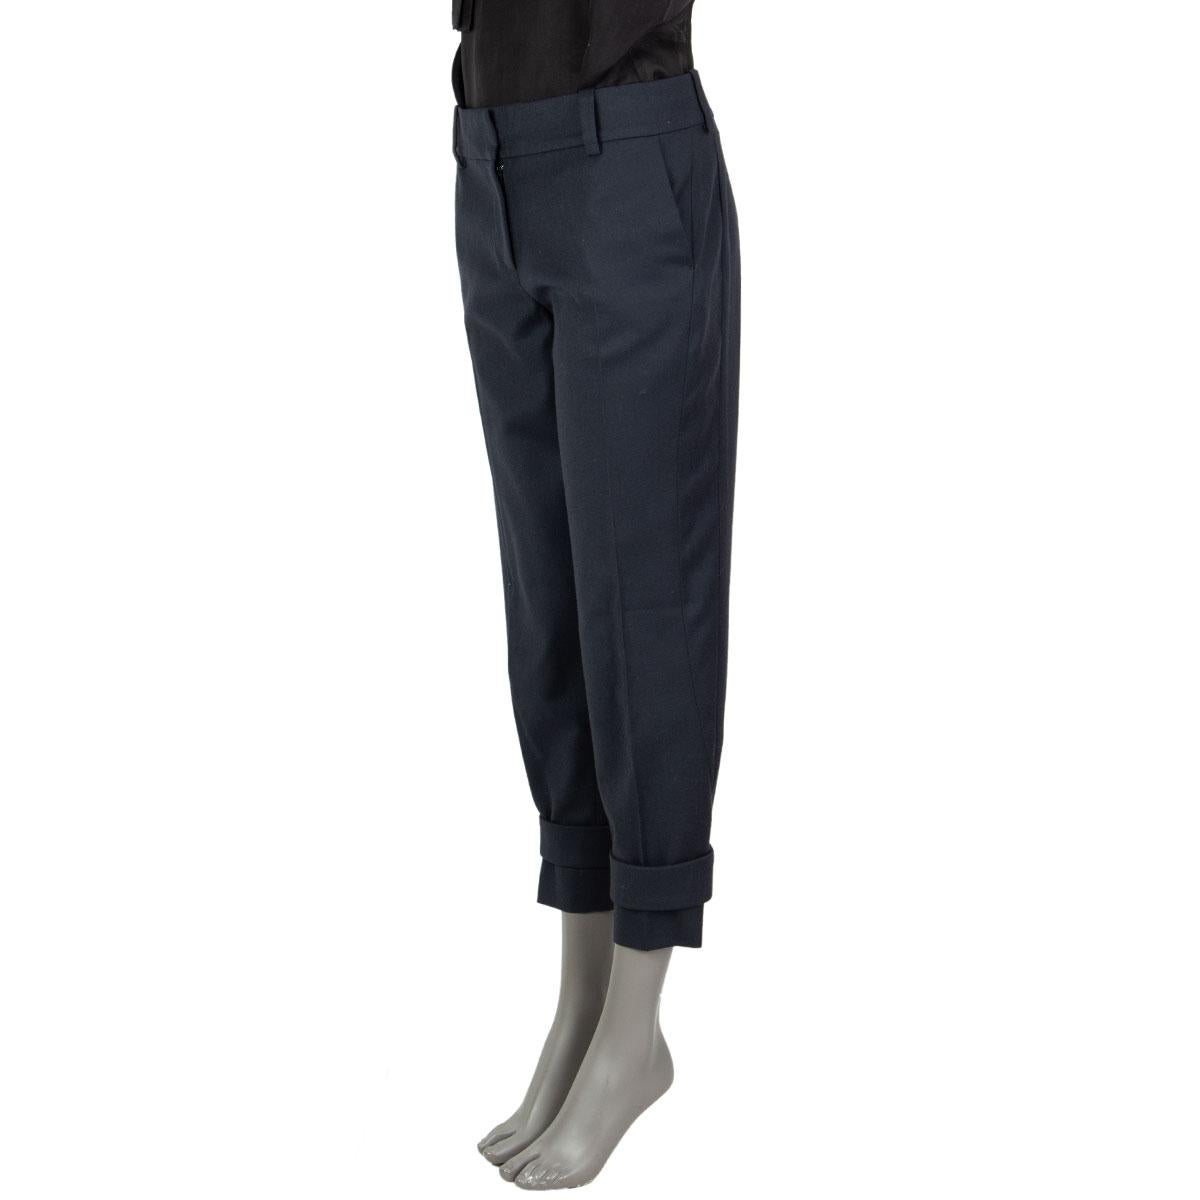 authentic Celine tapered pants in steel gray wool (94%), nylon (4%), elastane (2%) with velcro fastening details at the bottom. Opens with a hook and a zipper on the front and has slit pockets. Unlined. Has been worn and is in excellent